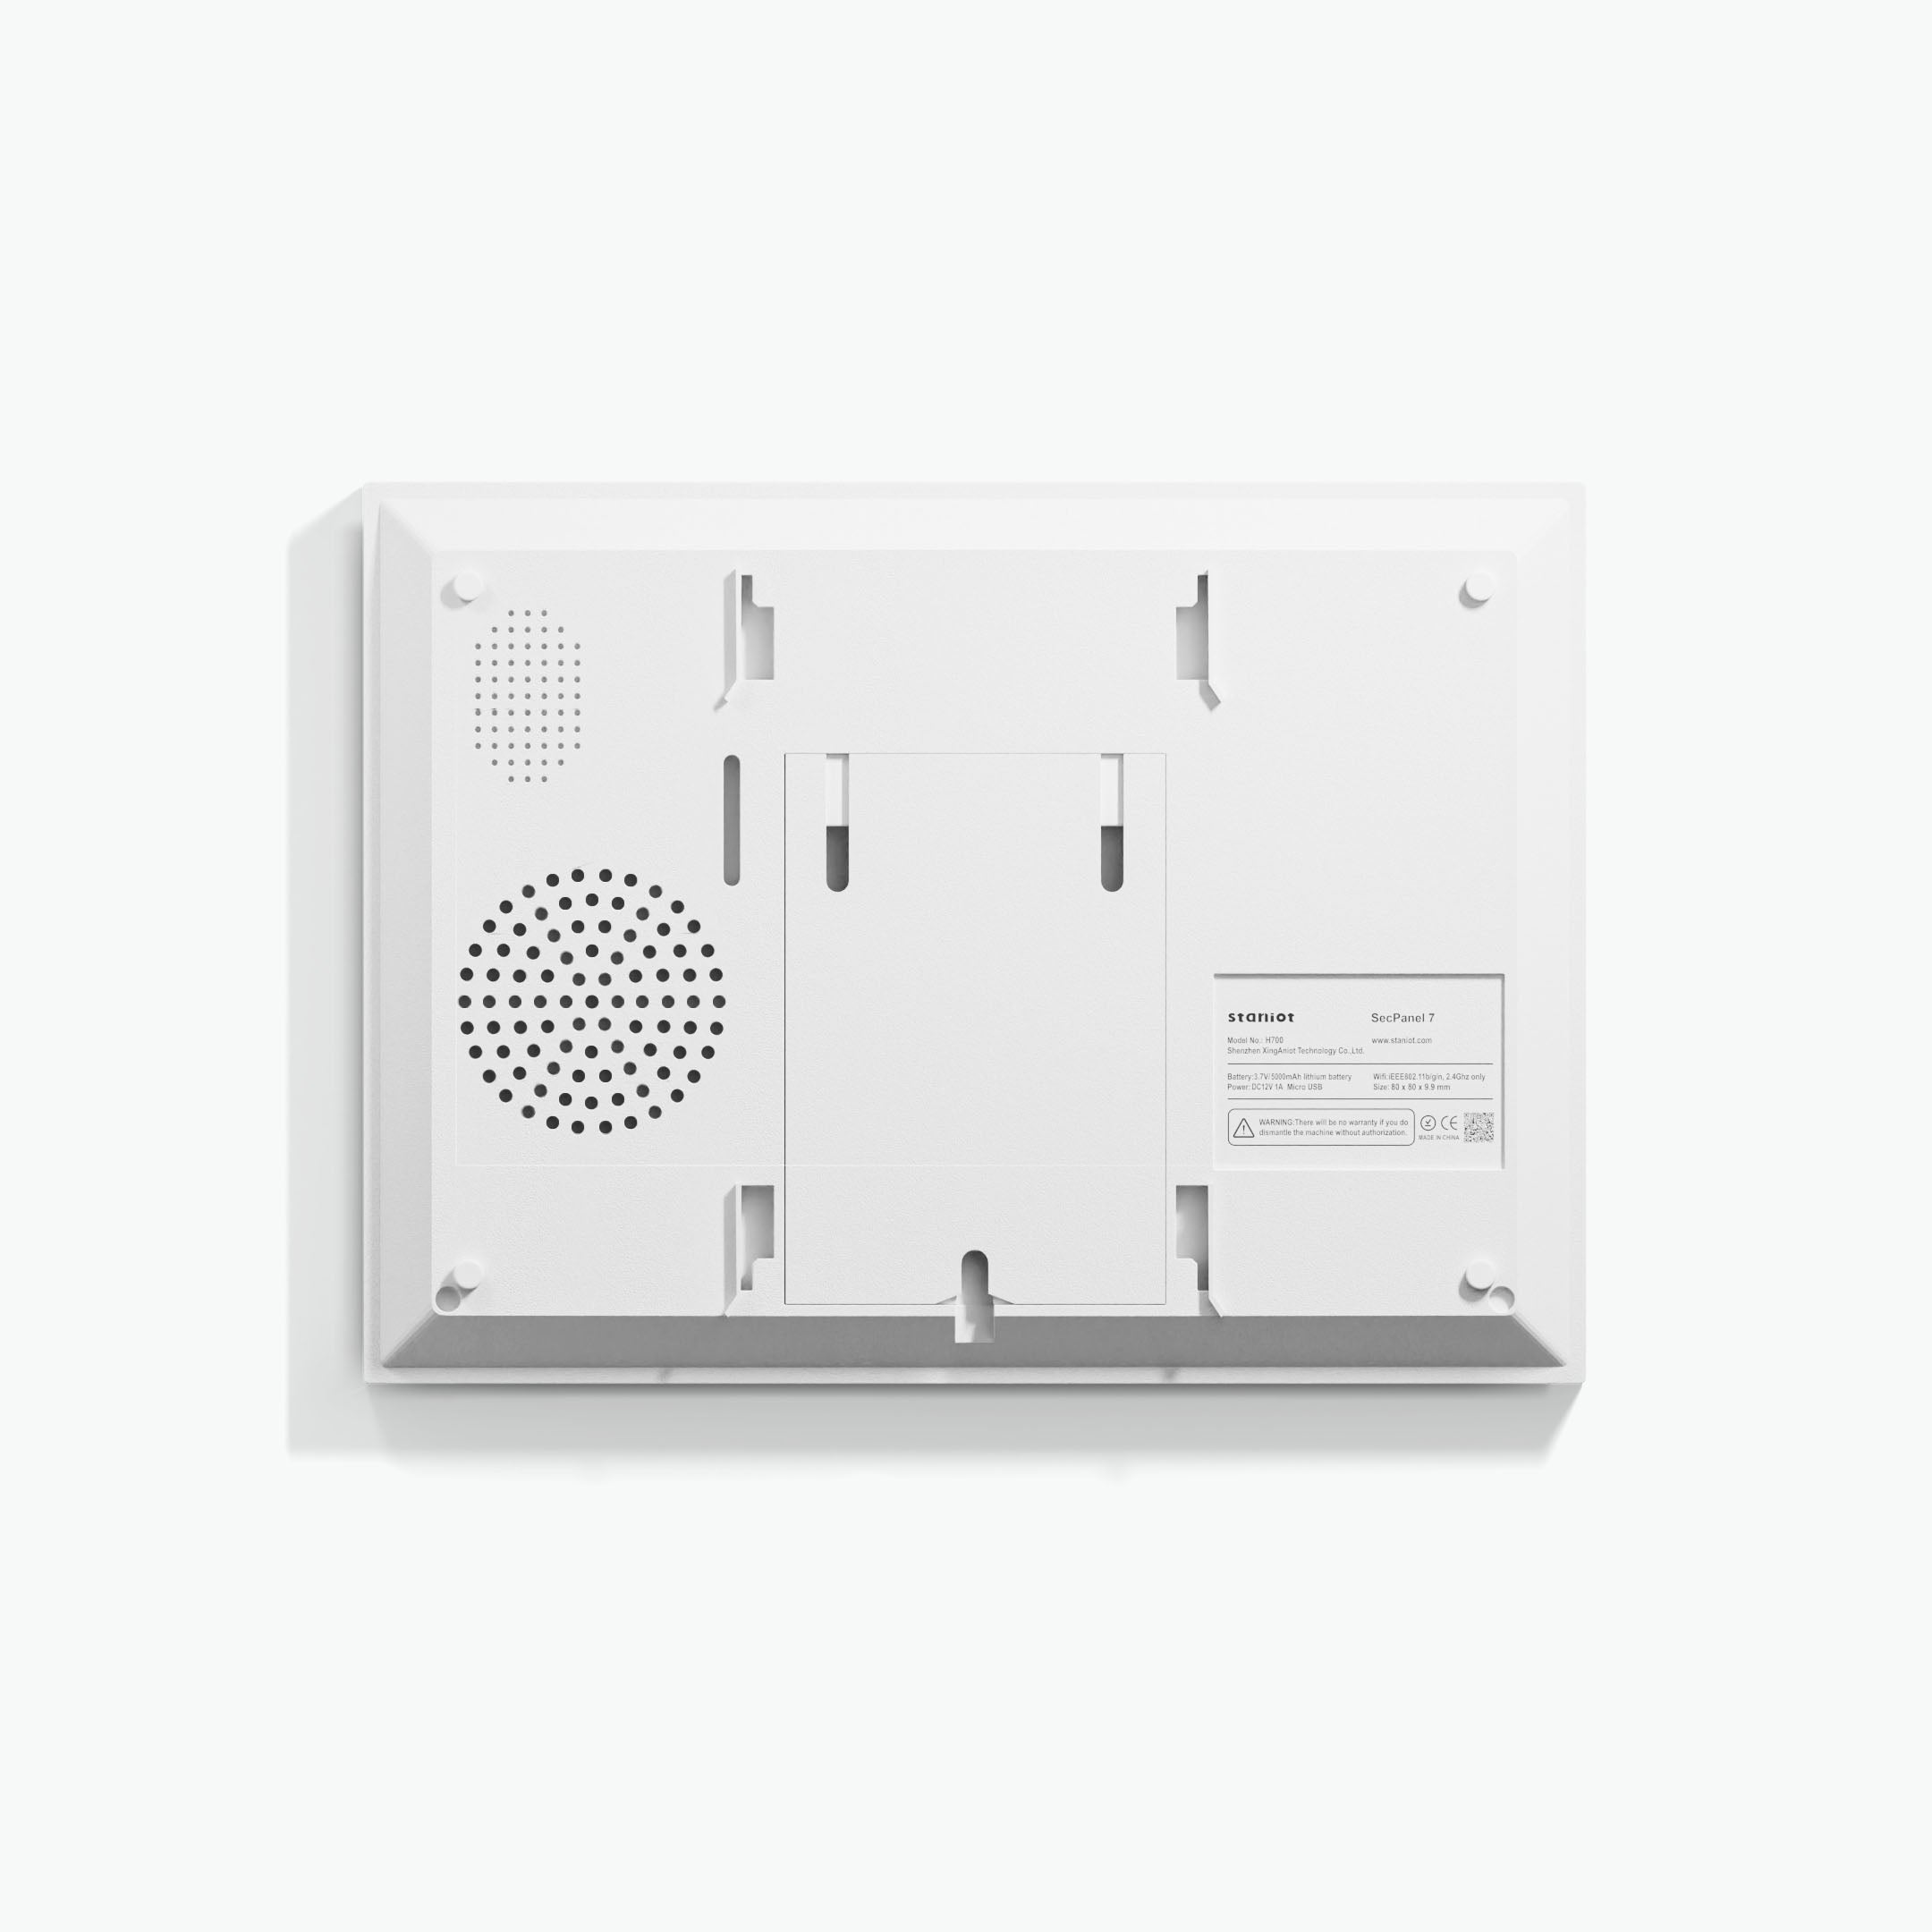 Back view of Staniot Secpanel 7 smart security panel on a white background